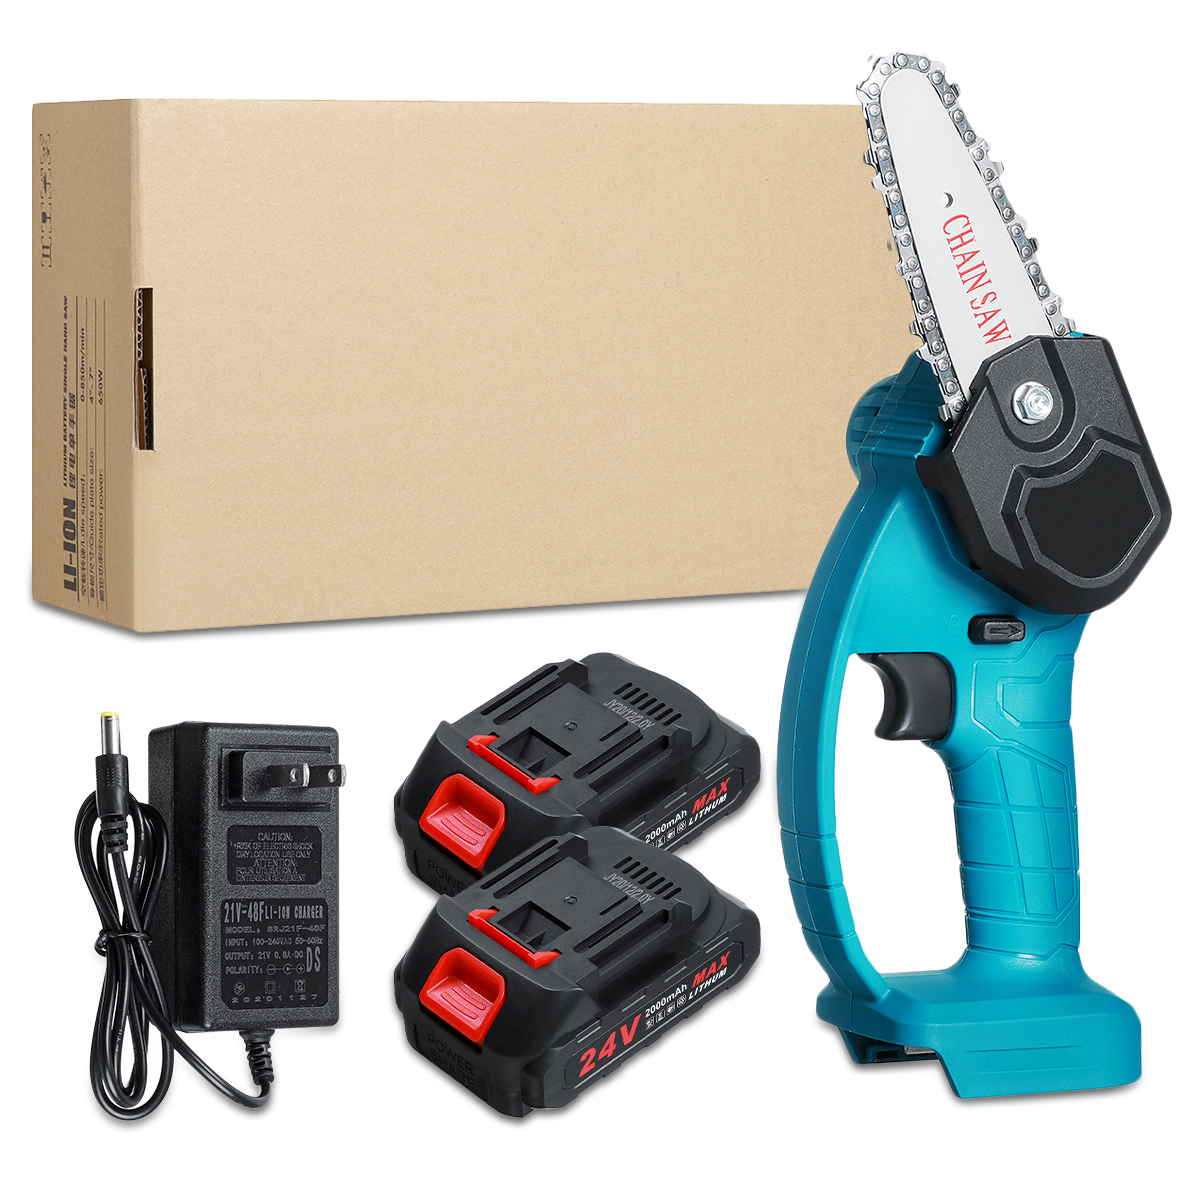 24V-Electric-Chain-Saw-4-Inch-Mini-Chainsaw-Woodworking-Pruning-Garden-Power-Tool-W-1-or-2-Battery-F-1797383-11